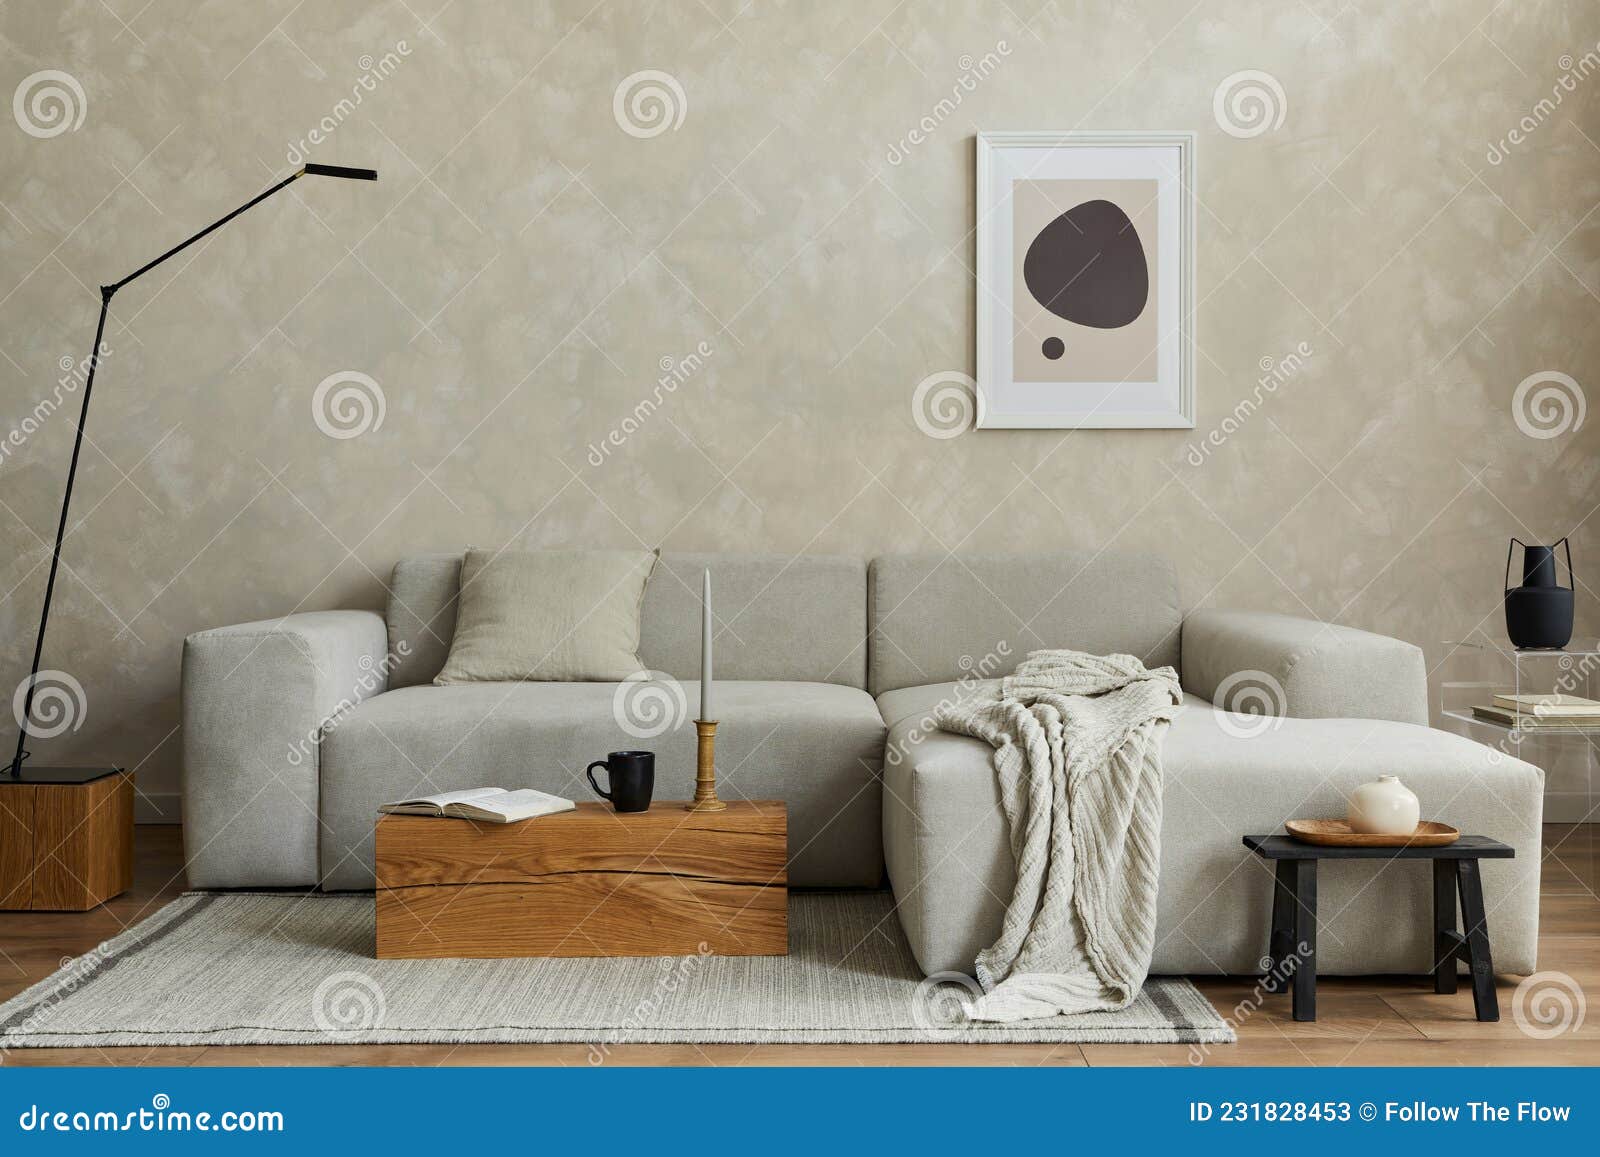 creative composition of stylish japandi living room with mock up poster frame, grey sofa, wooden cubes,  vases and small.